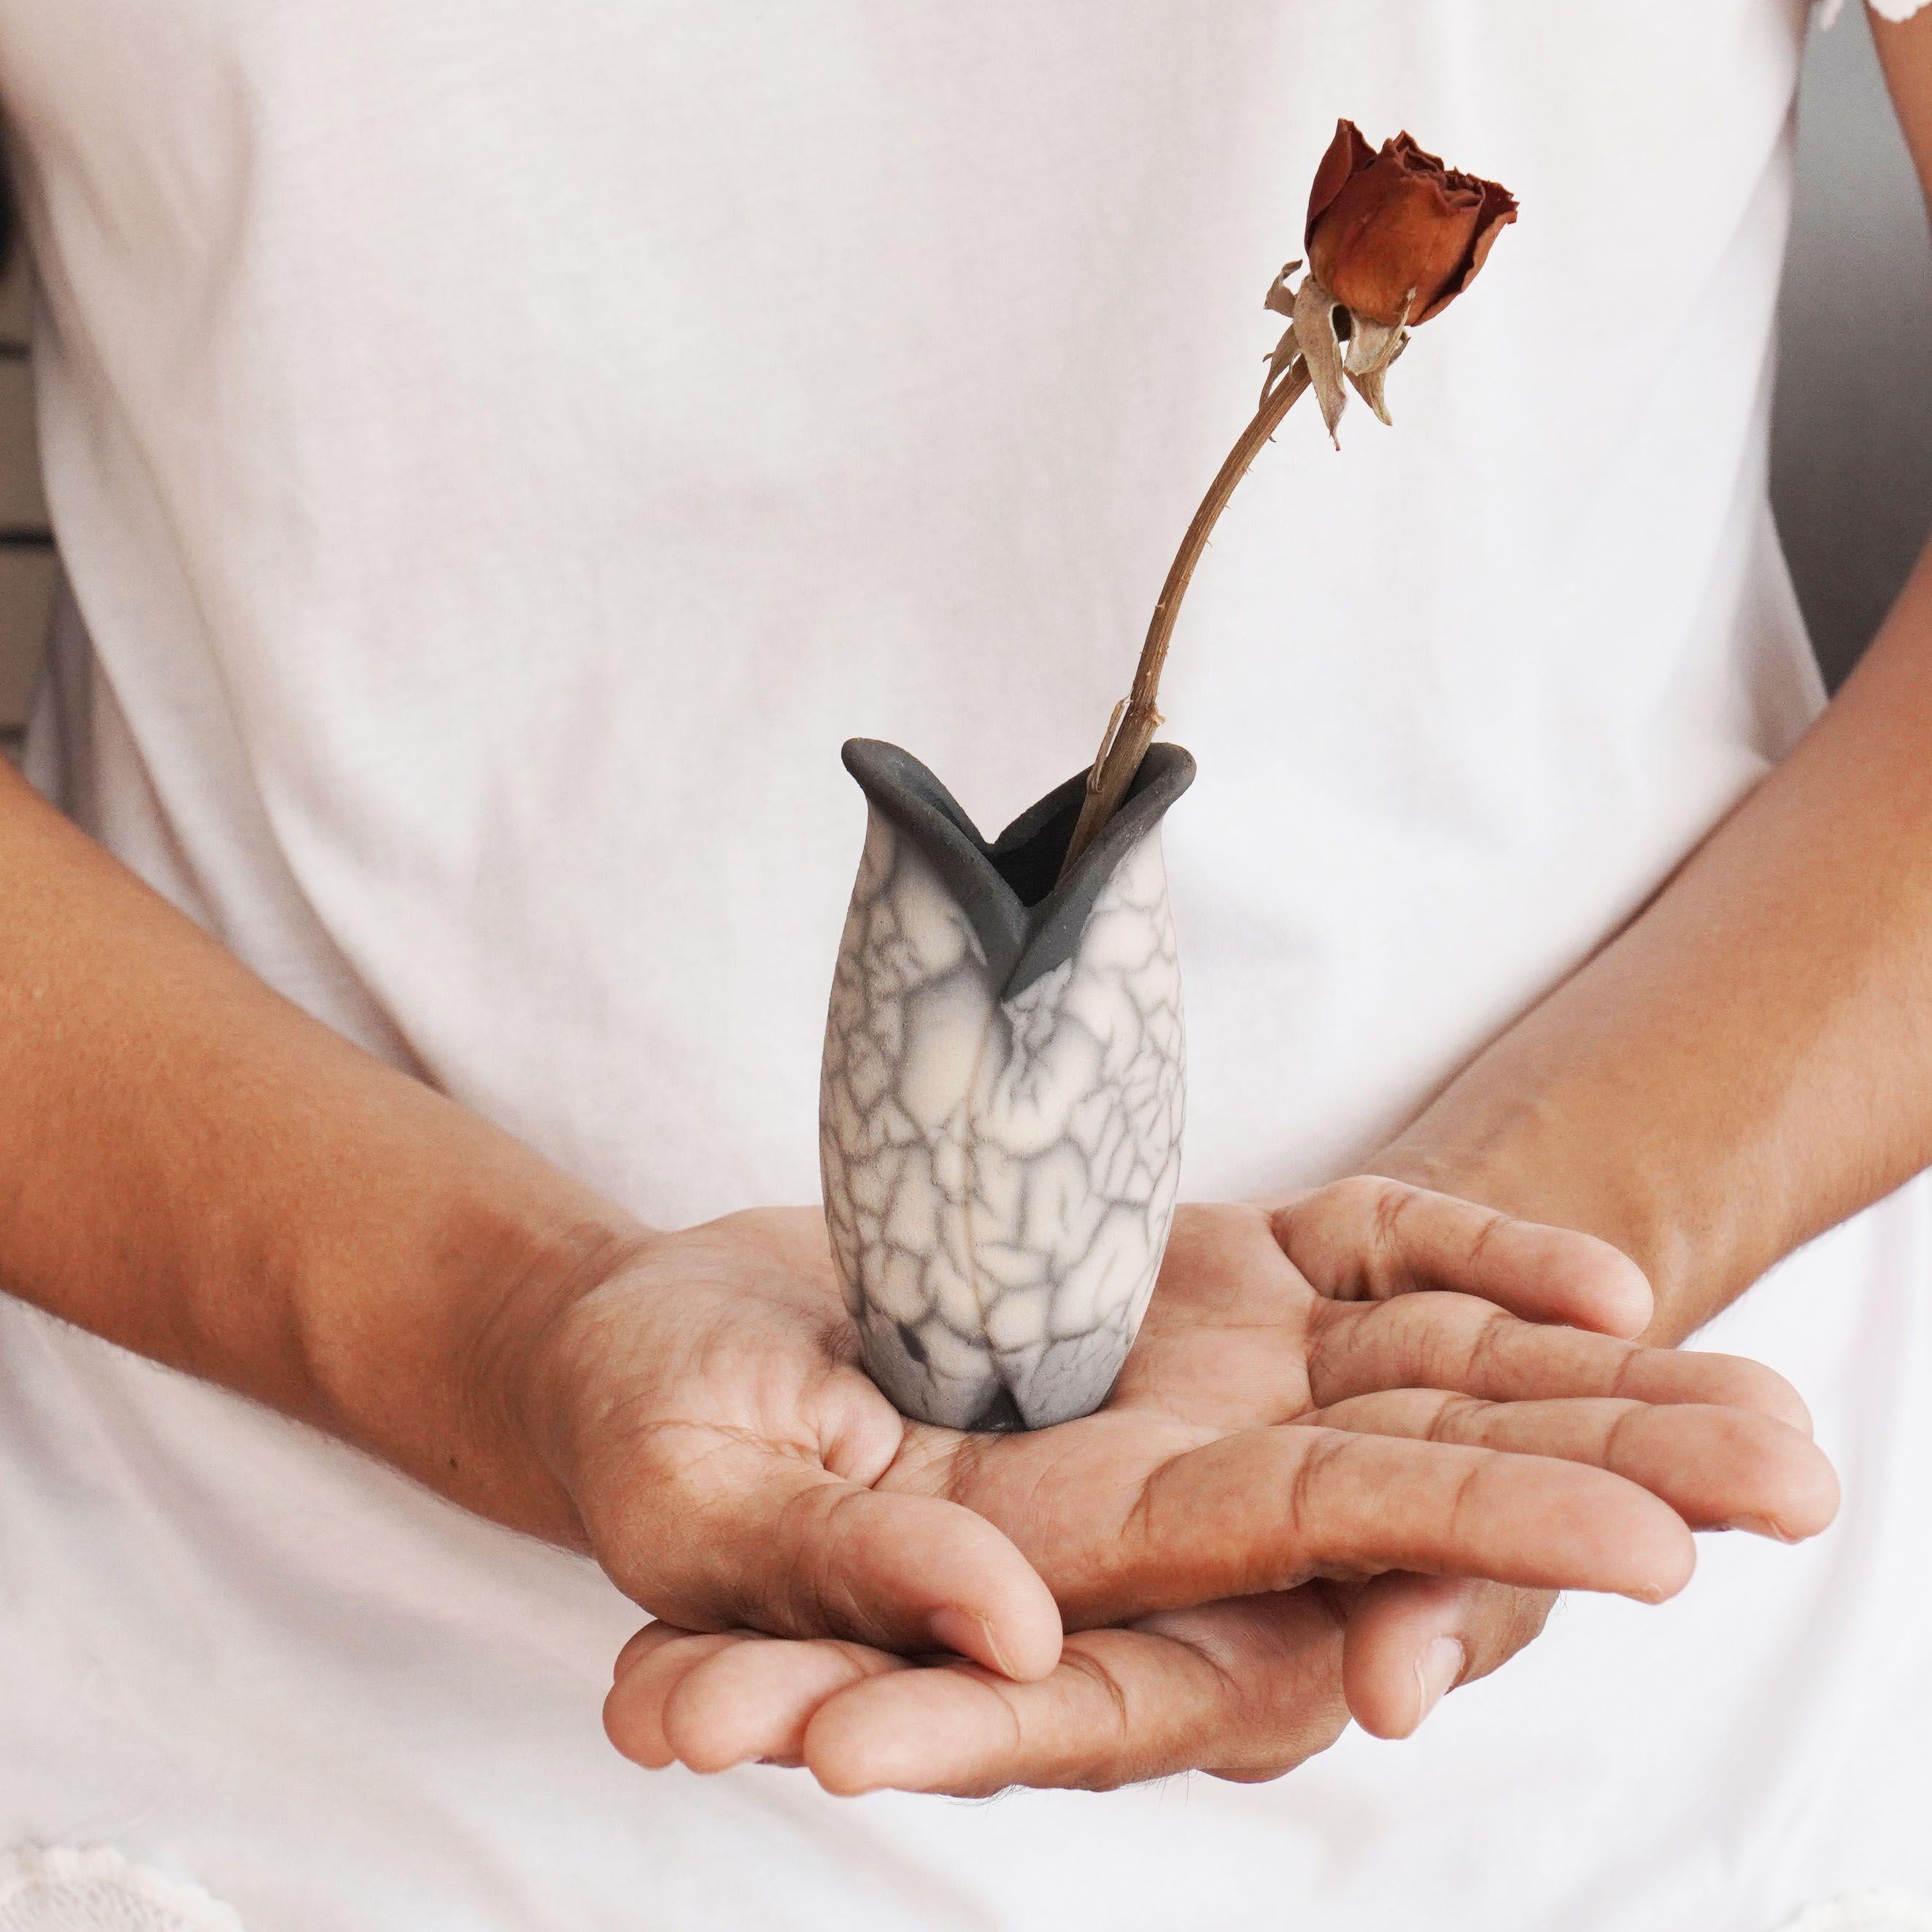 Hana F ~ 花 Flower. 

Our Hana F mini raku vase is clay representation of a tulip flower. Two overlapping petals form the body of this mini vase. This vase makes for an adorable gift or a tabletop decorative piece that truly stands out. Each piece is